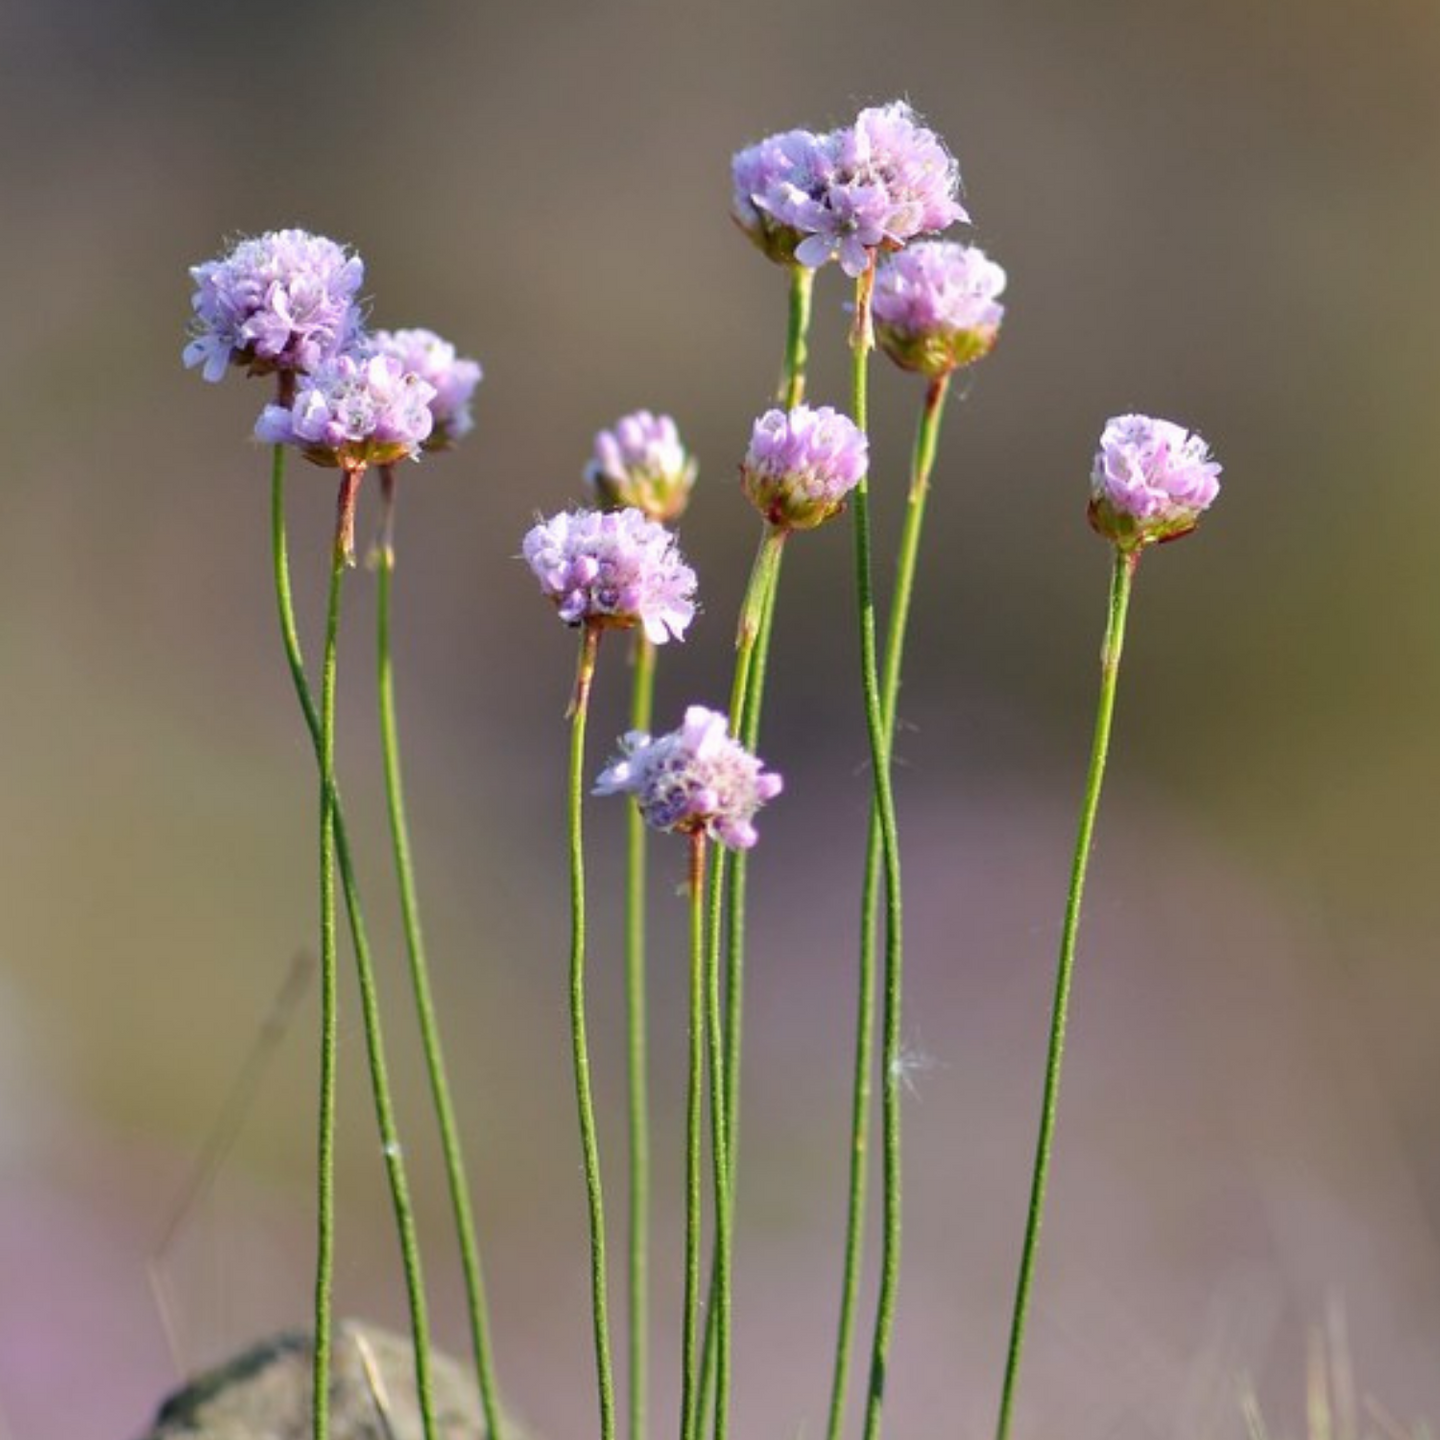 Delicate pink flowers of Thrift Seapink (Armeria maritima). One of 100+ species of Pacific Northwest native plants available at Sparrowhawk Native Plants, Native Plant Nursery in Portland, Oregon.